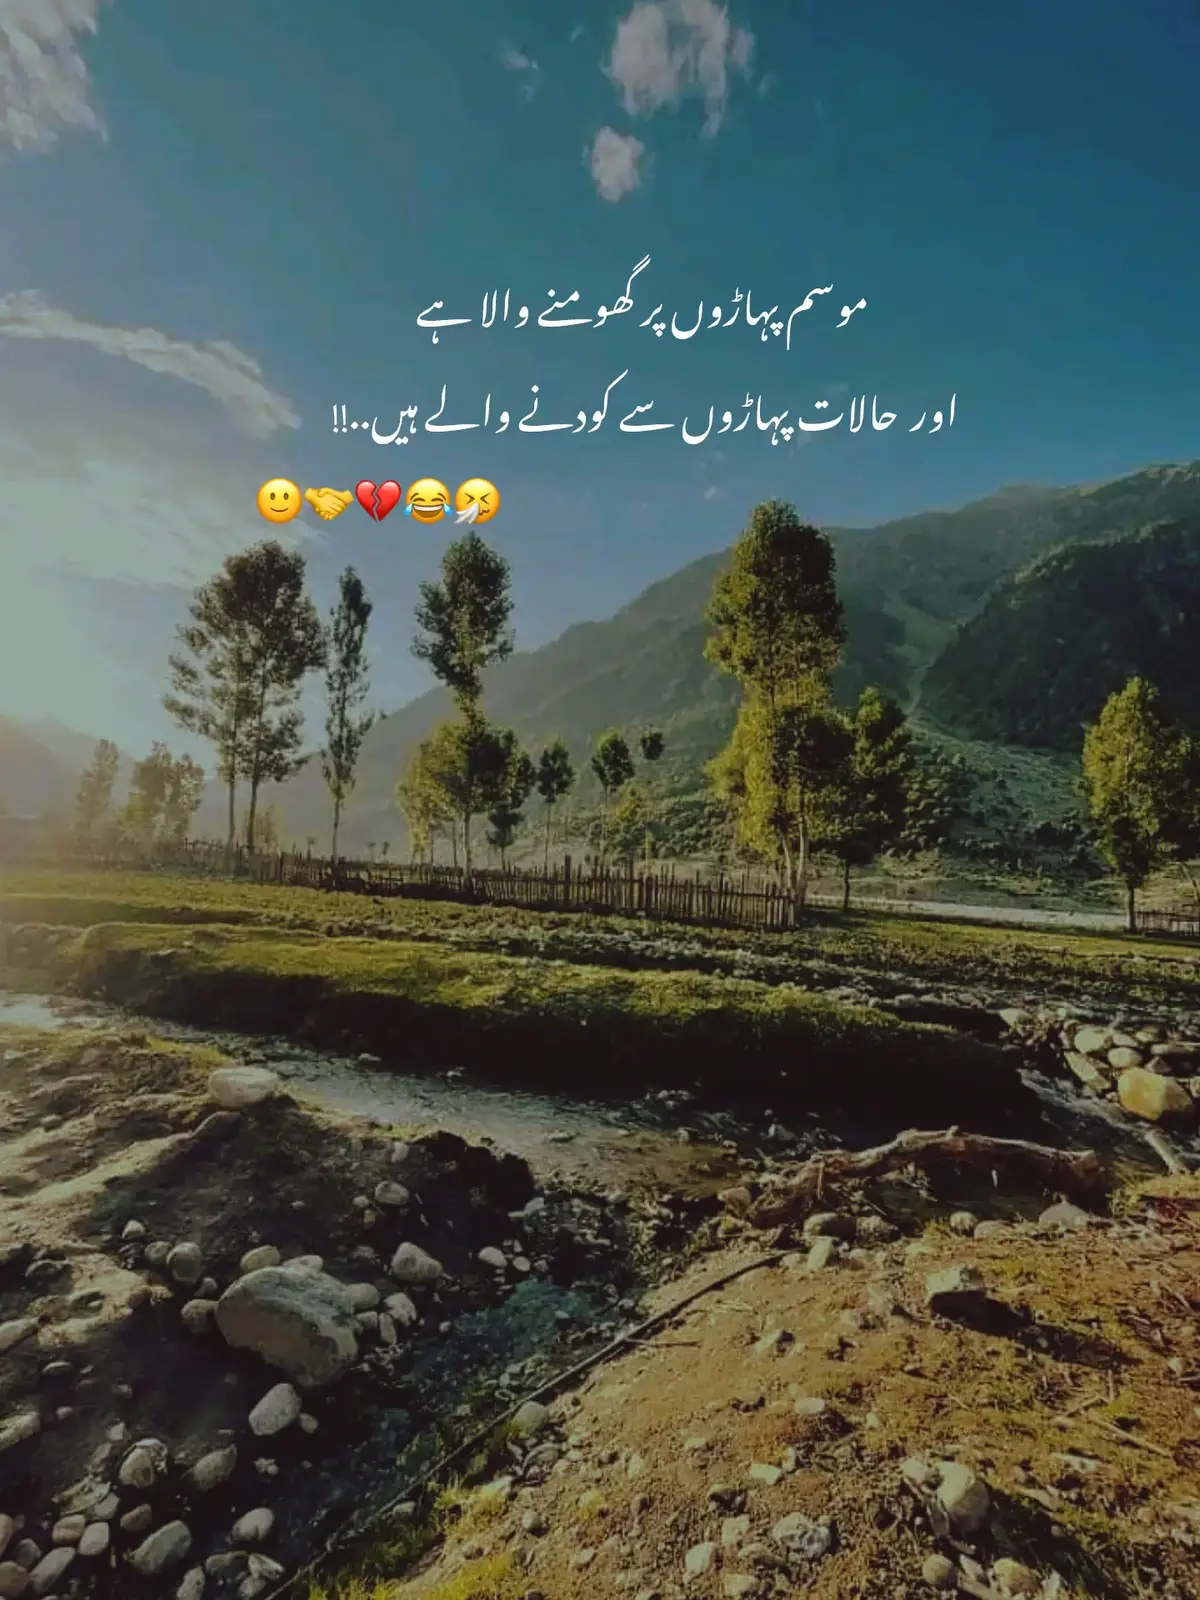 Kis kis K Halaat Aisy Hain 😂💔🙂 #fyp #tiktok #viralsound #foryou #foryoupage #fypシ #standwithkashmir #poetry #growmyaccount #viralvideo #unfrezzmyaccount #deeplines #wheneverwherever #dontunderreviewmyvideo #fyp #trending #urdupoetry #deepthoughts #foryouu #whattowatch #tiktok #viral 